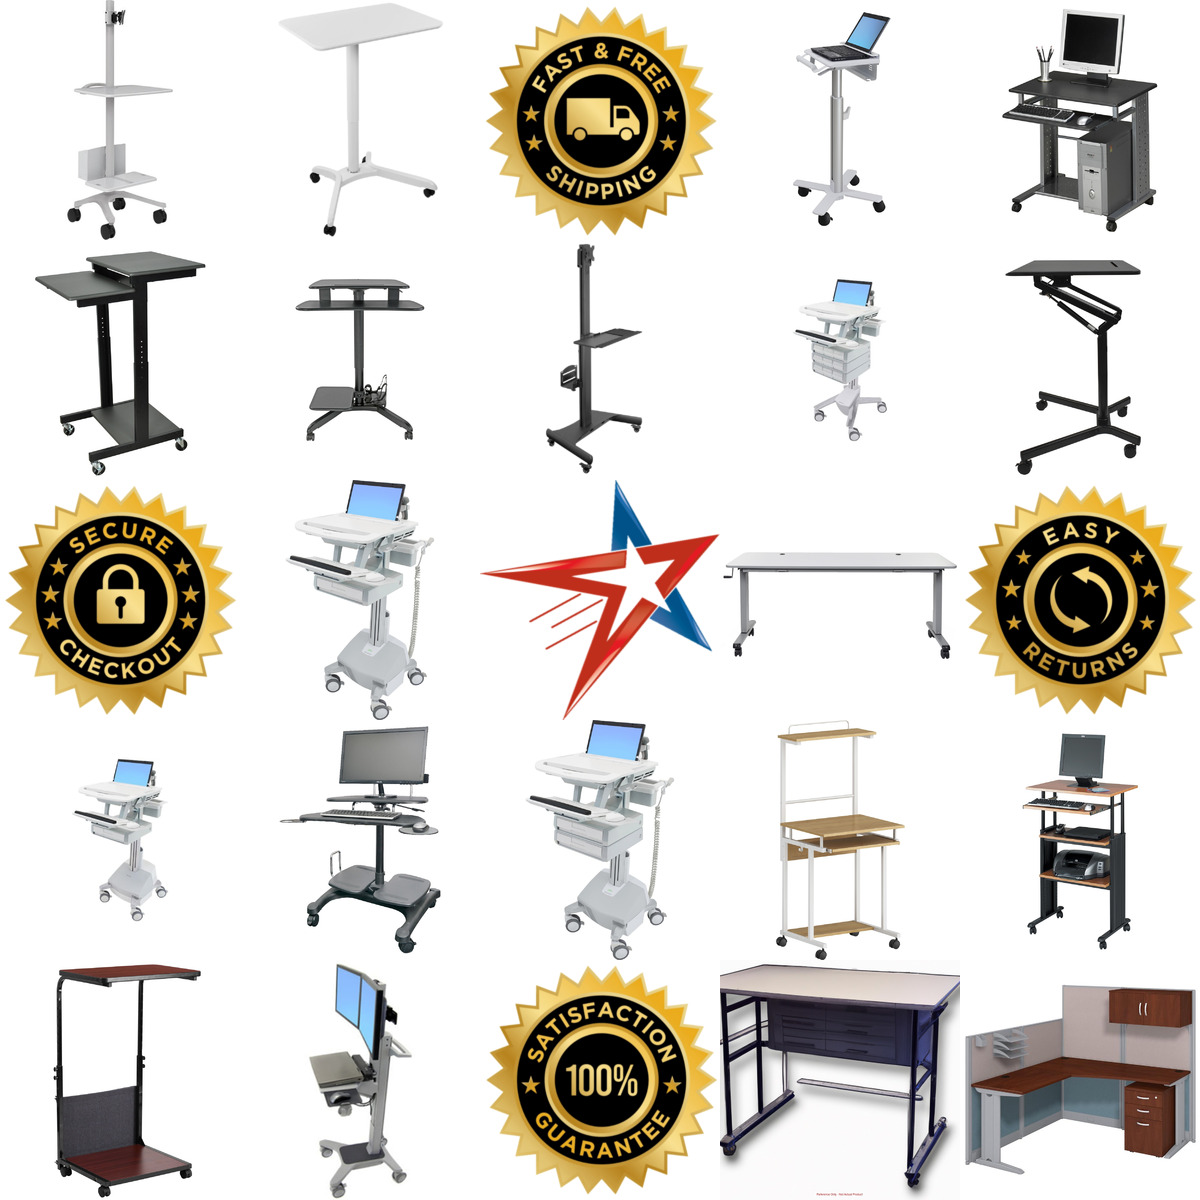 A selection of Portable Desks products on GoVets